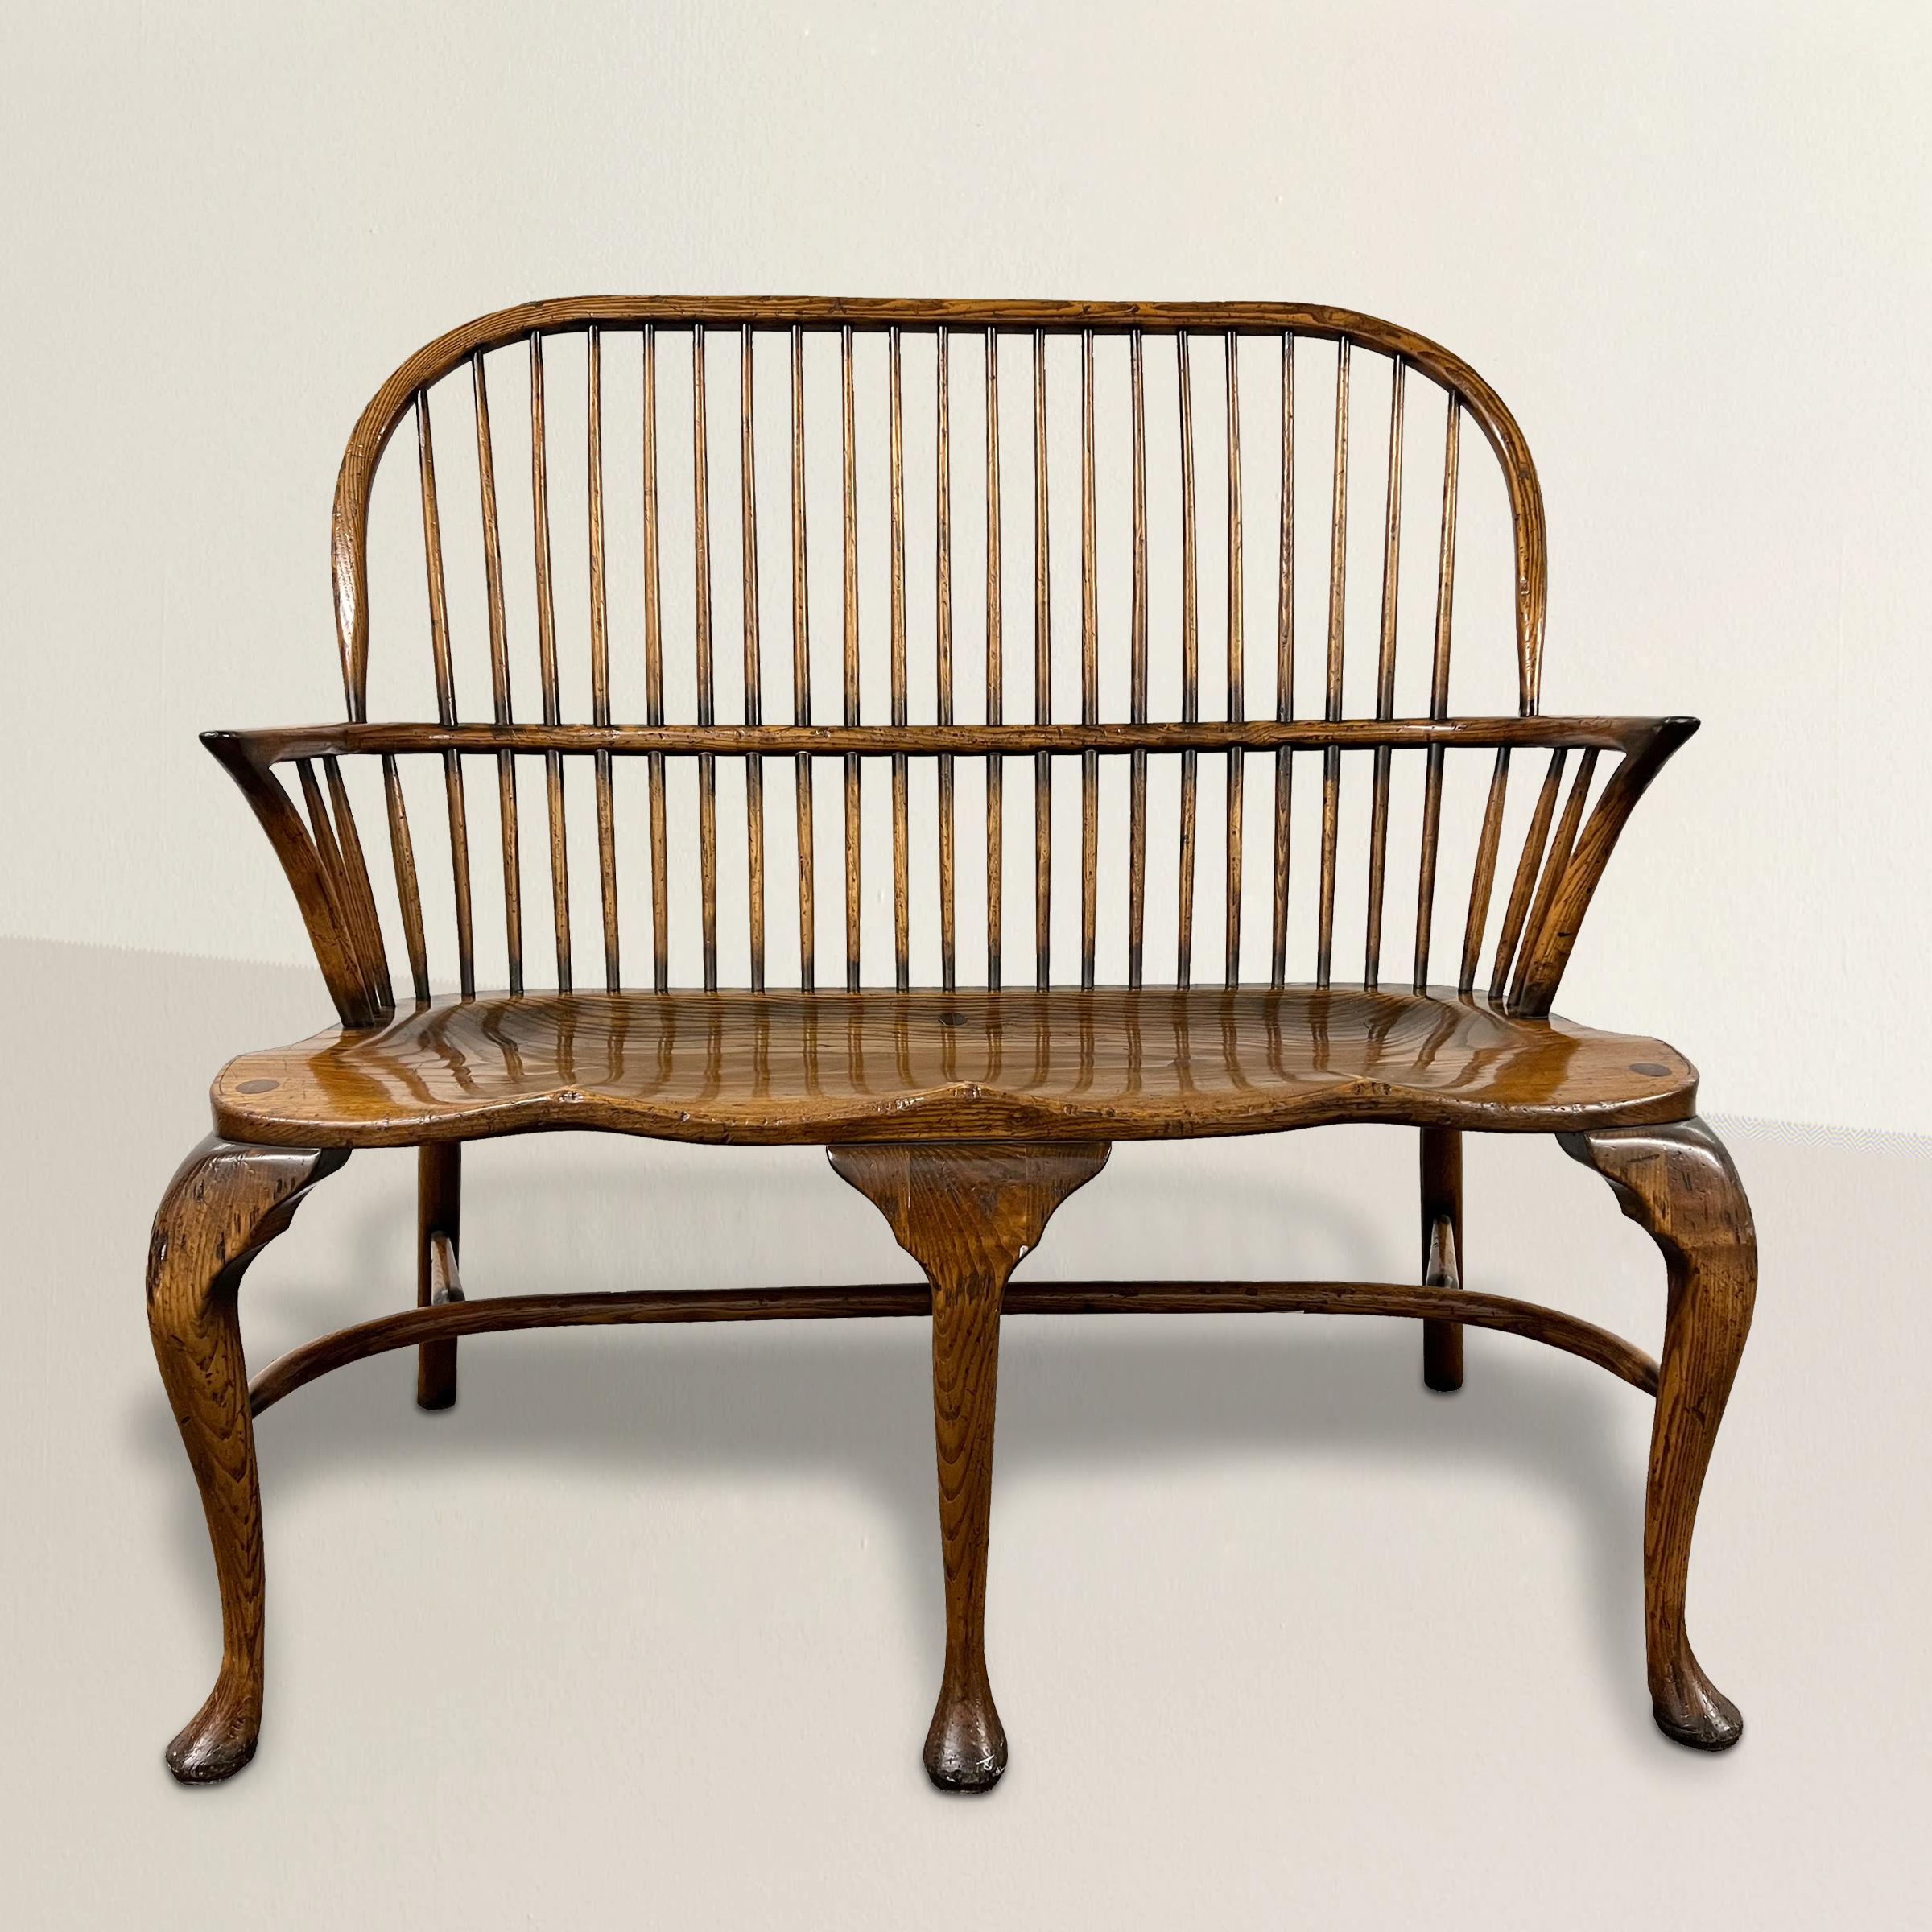 Step into the timeless elegance of this 20th-century English oak Windsor two-seat sack-back bench, a true embodiment of traditional craftsmanship and refined design. Crafted from sturdy oak, this bench showcases the classic Windsor style with its